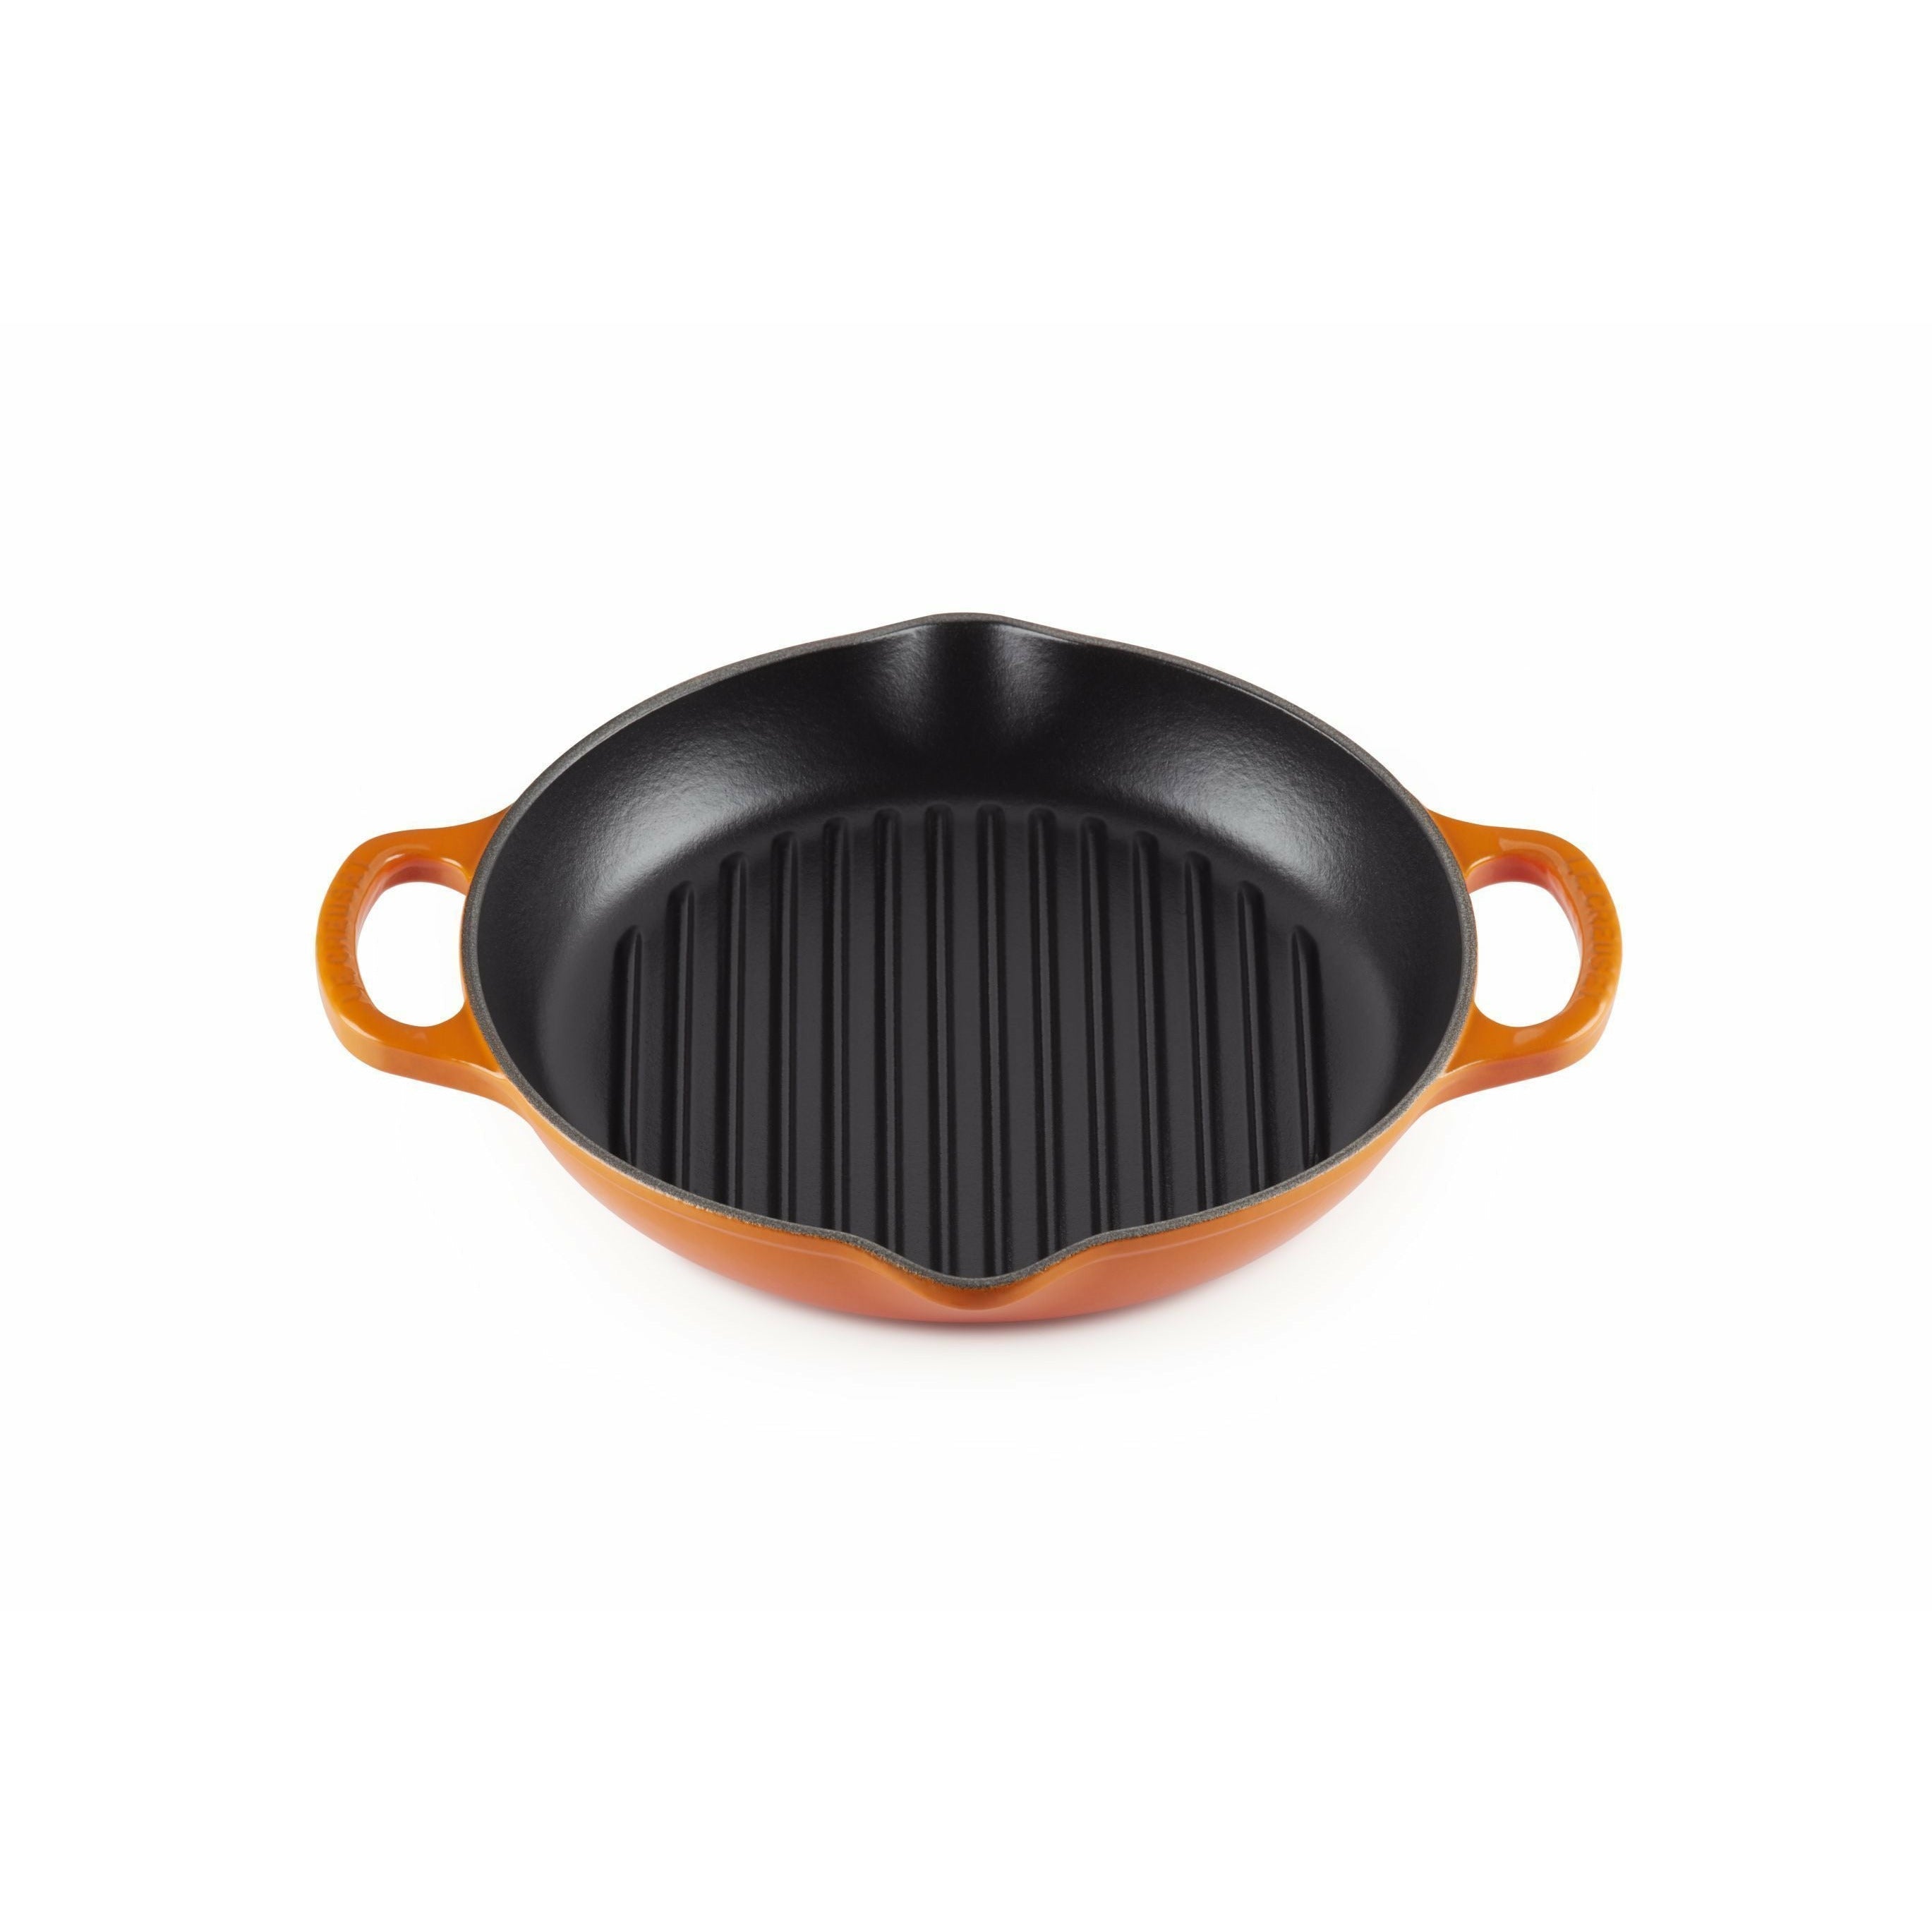 Le Creuset Nature High Round Grill Pan 25 Cm, Oven Red